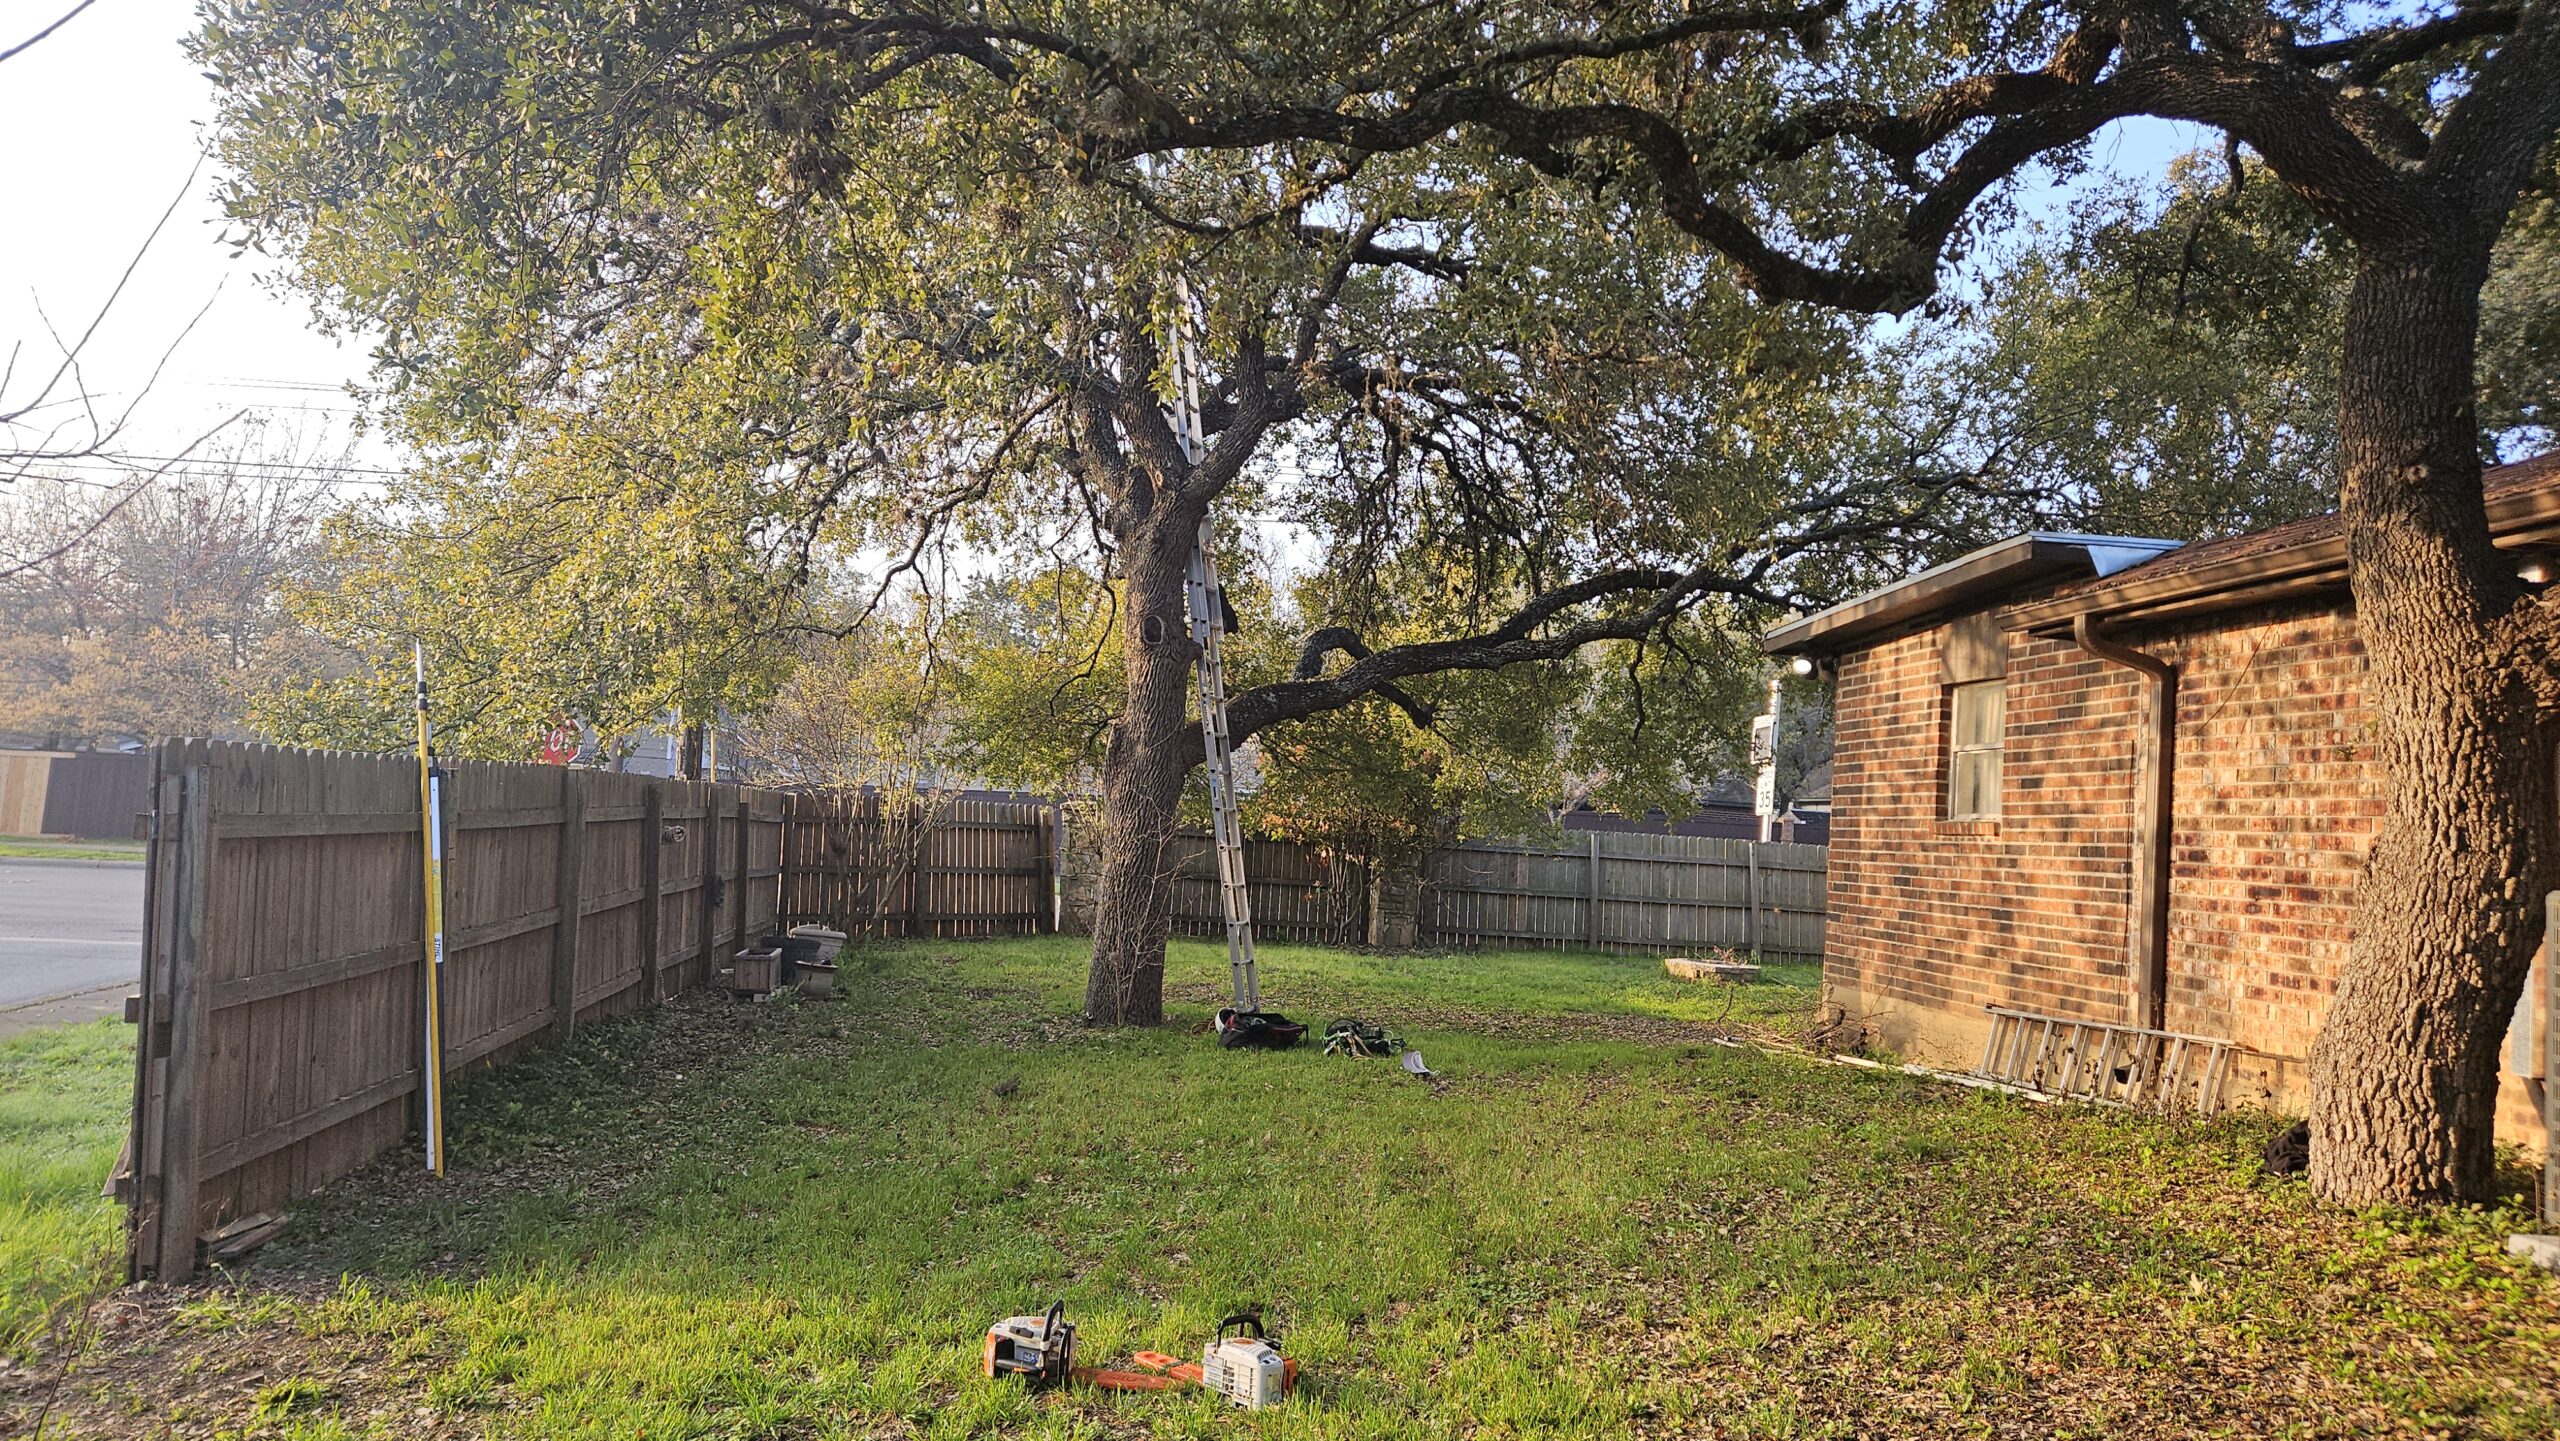 A 28 foot ladder is leaning against an overgrown Live Oak tree. At the foot of the ladder is climbing gear and other tree trimming equipment. In the forefront of the photo are gas-powered chain saws and to the left is a paint pole for cover oak tree wounds.